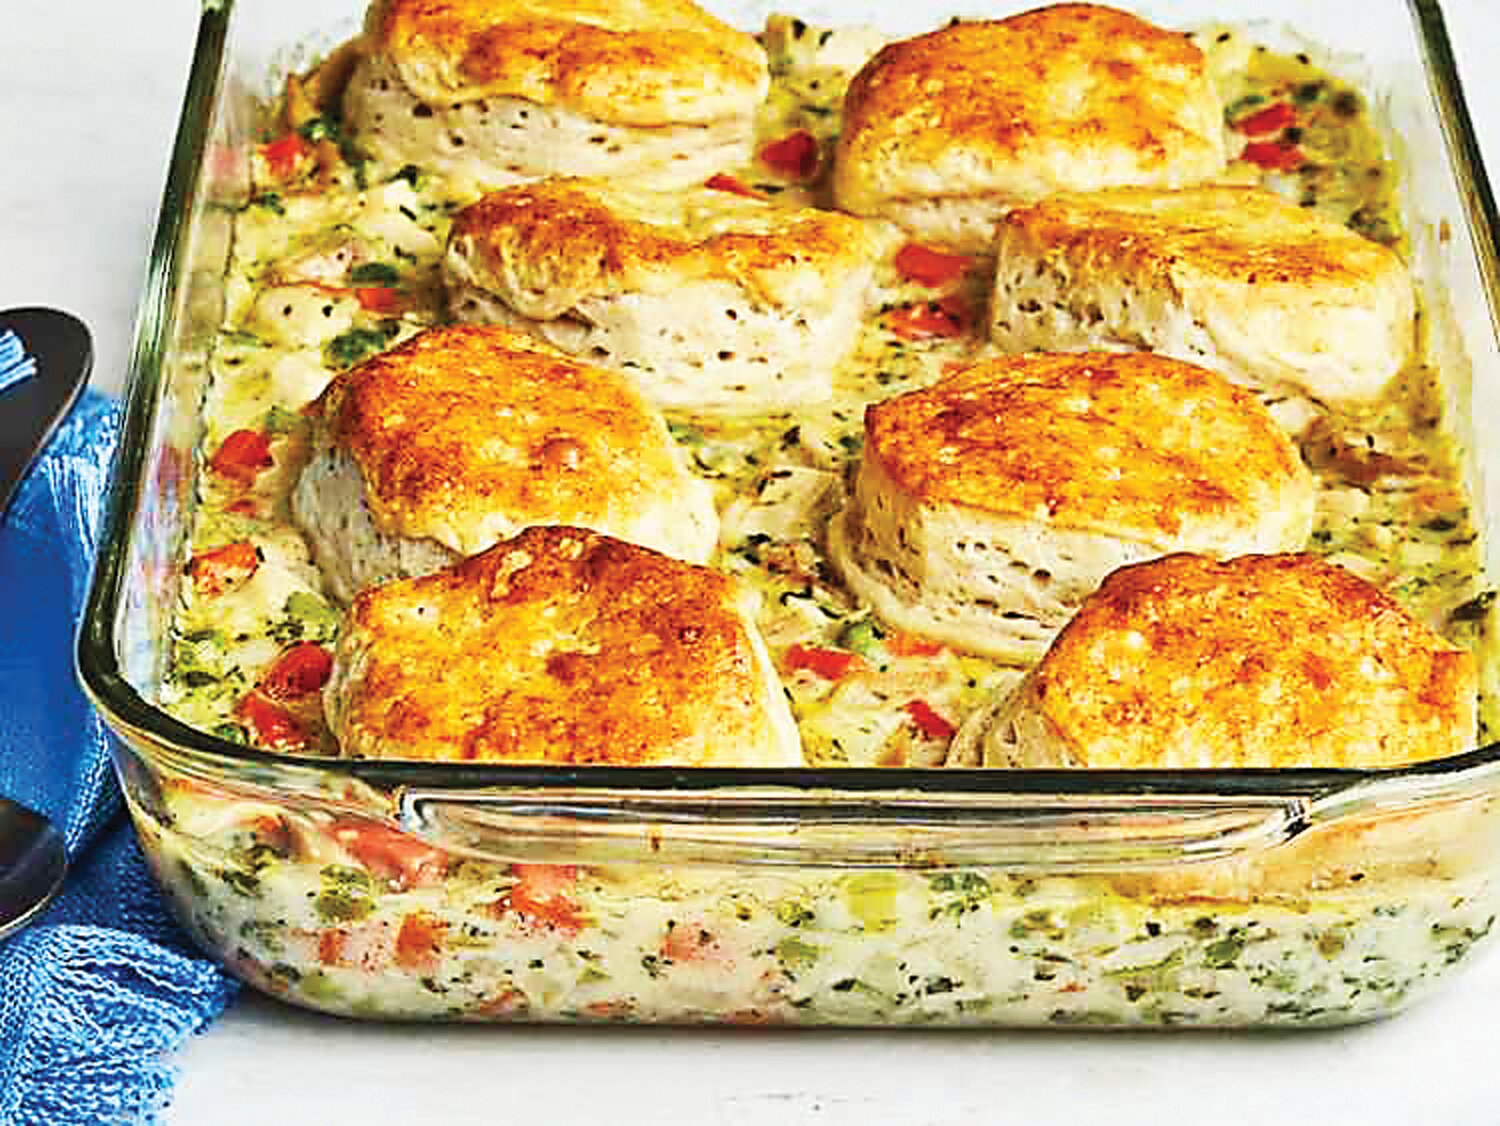 Winter is a great time to experiment with new recipes, even if you are having a Dry January. This easy pot pie is topped with biscuits.